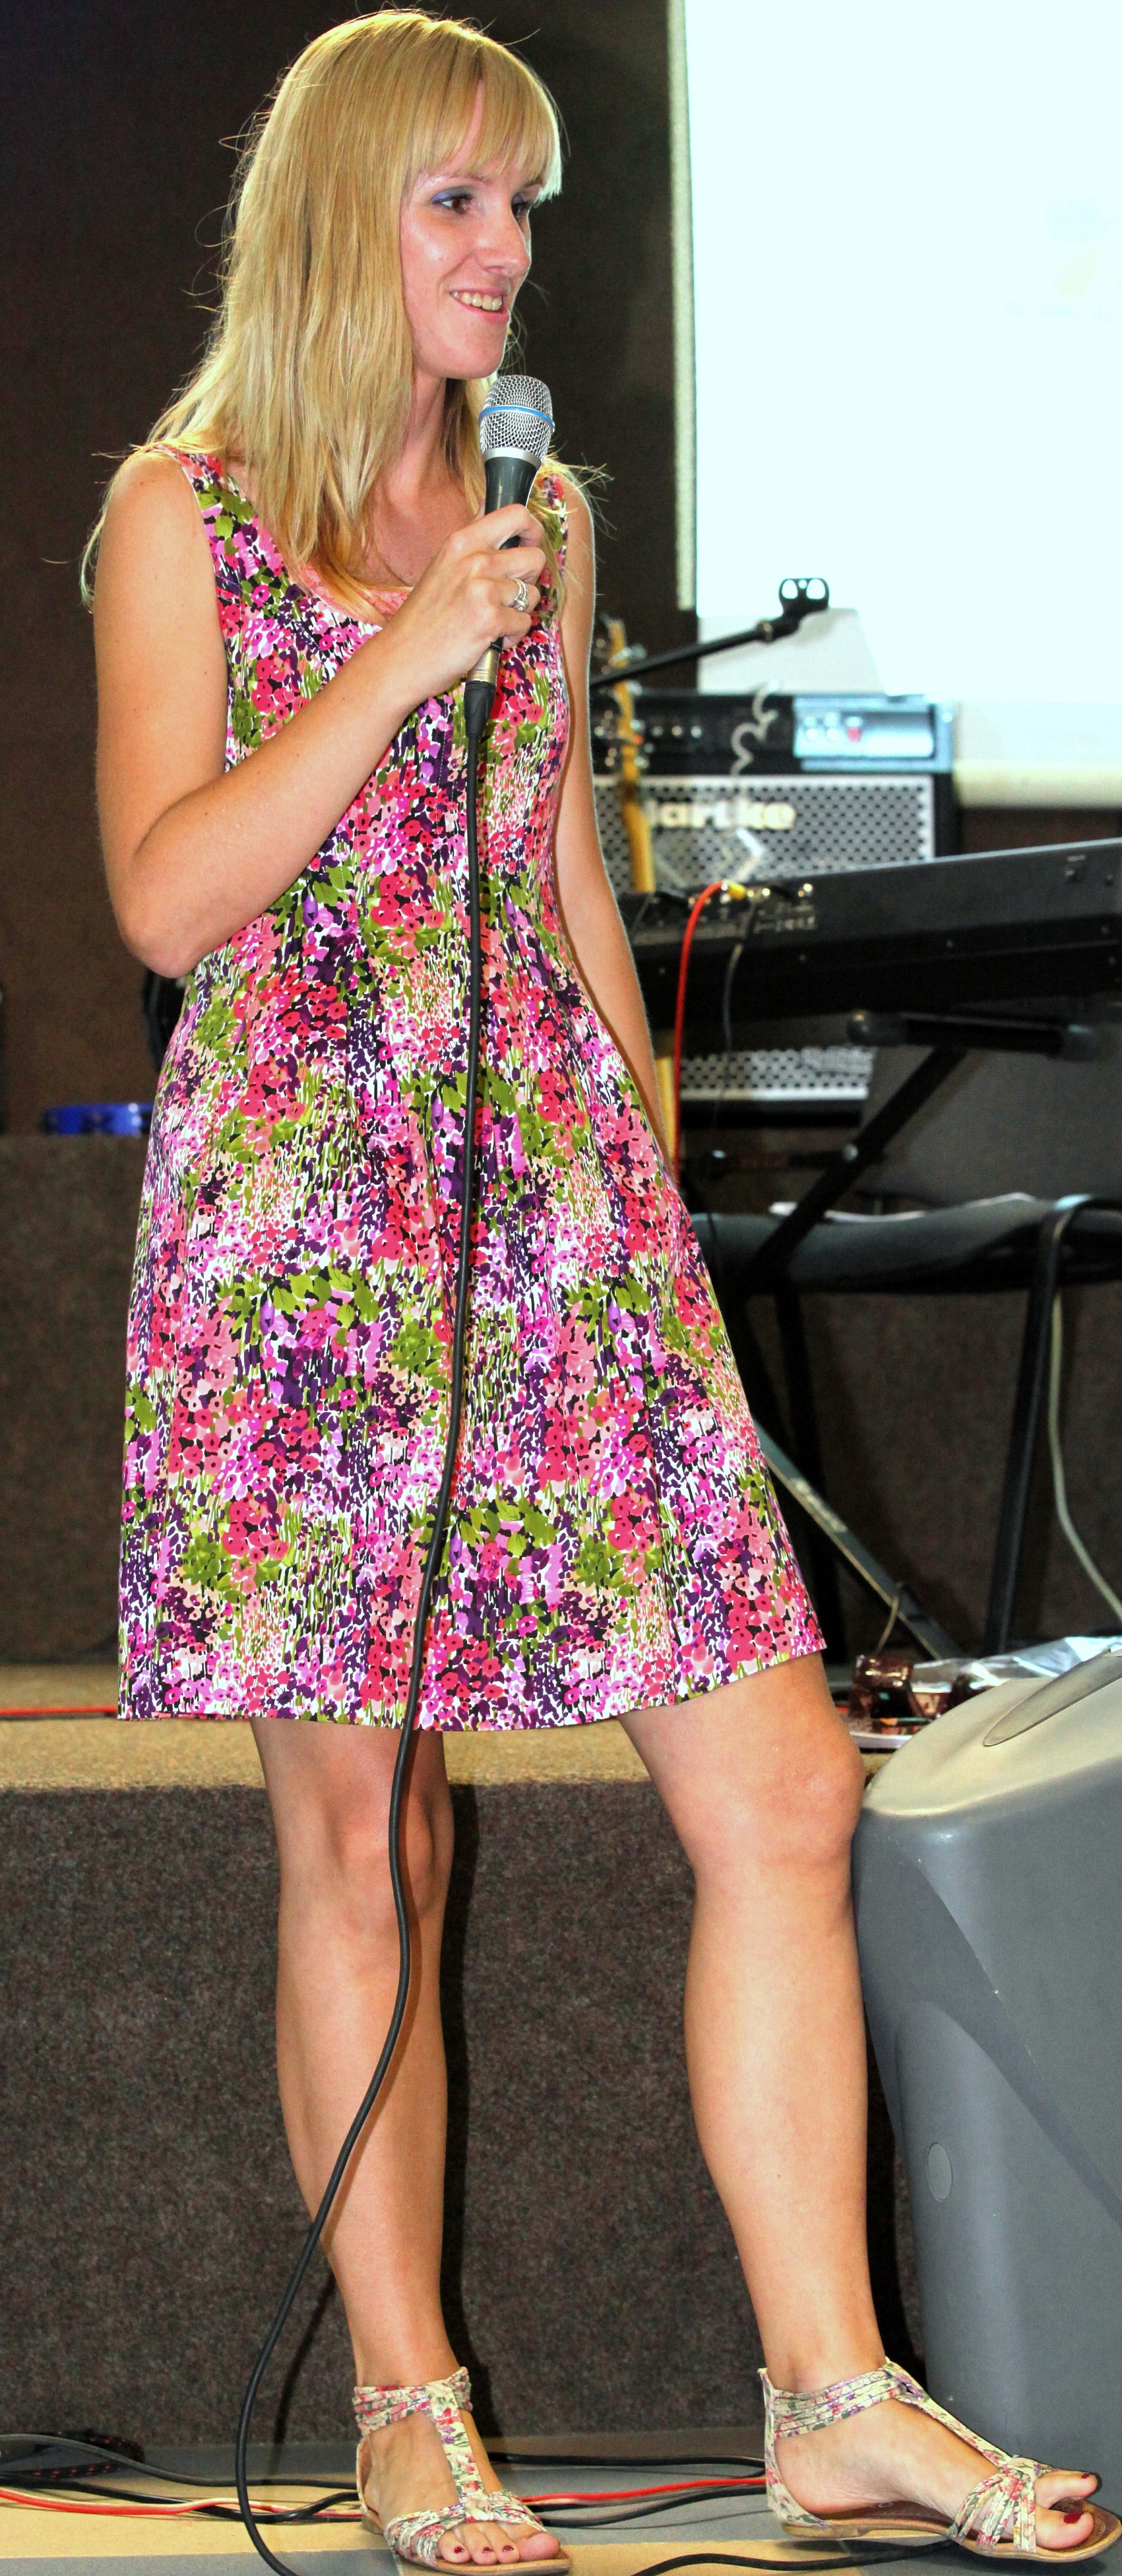 a blond girl in a colorful dress at a protestant gathering in July 2013, image 7/7